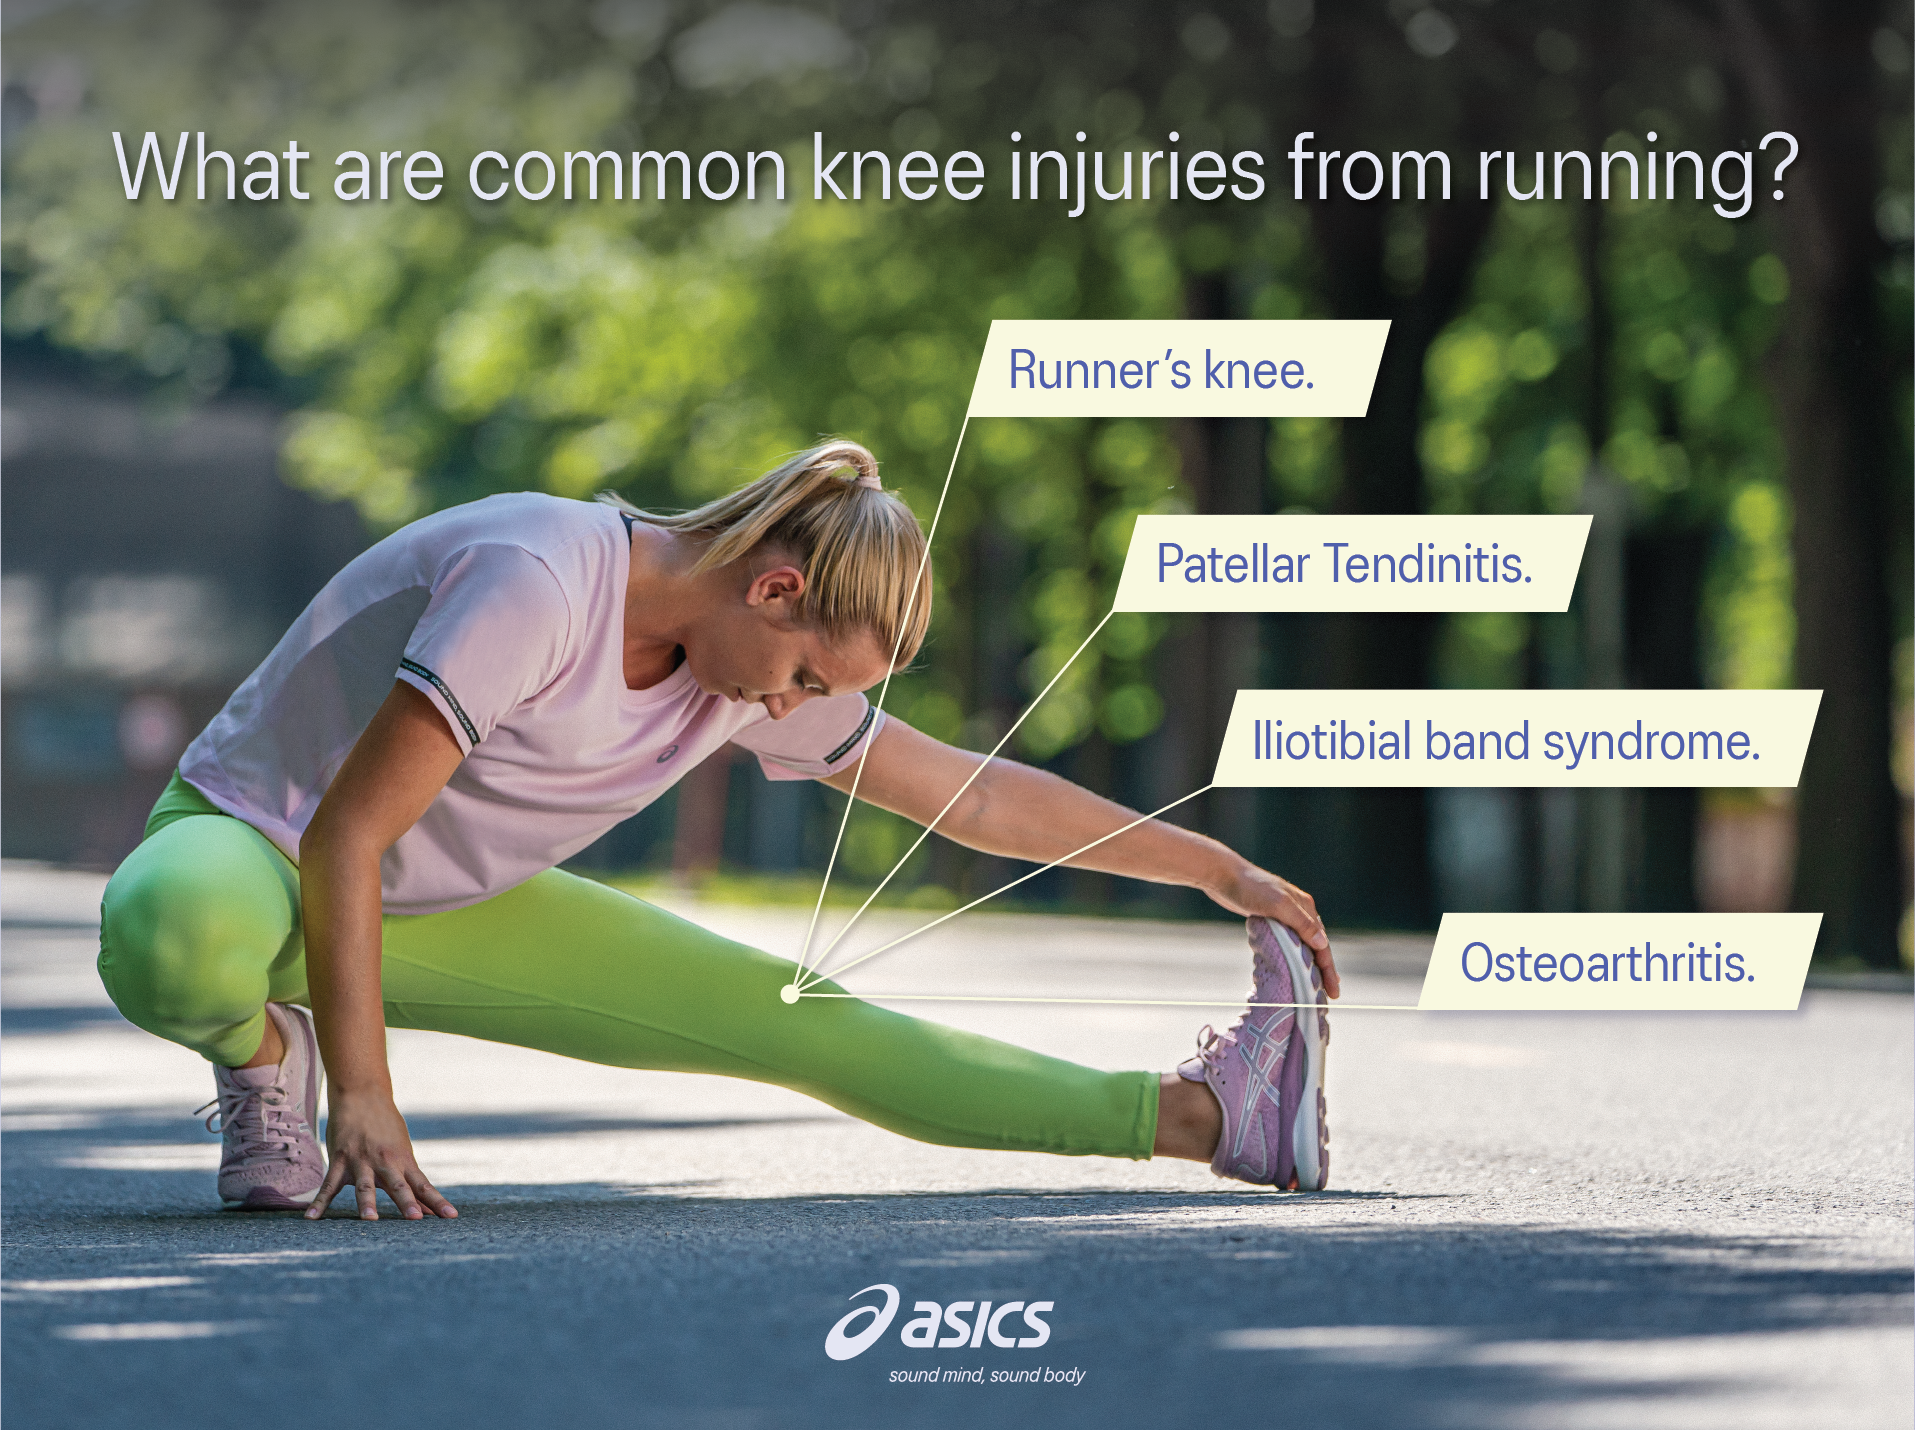 what are the common knee injuries from running?